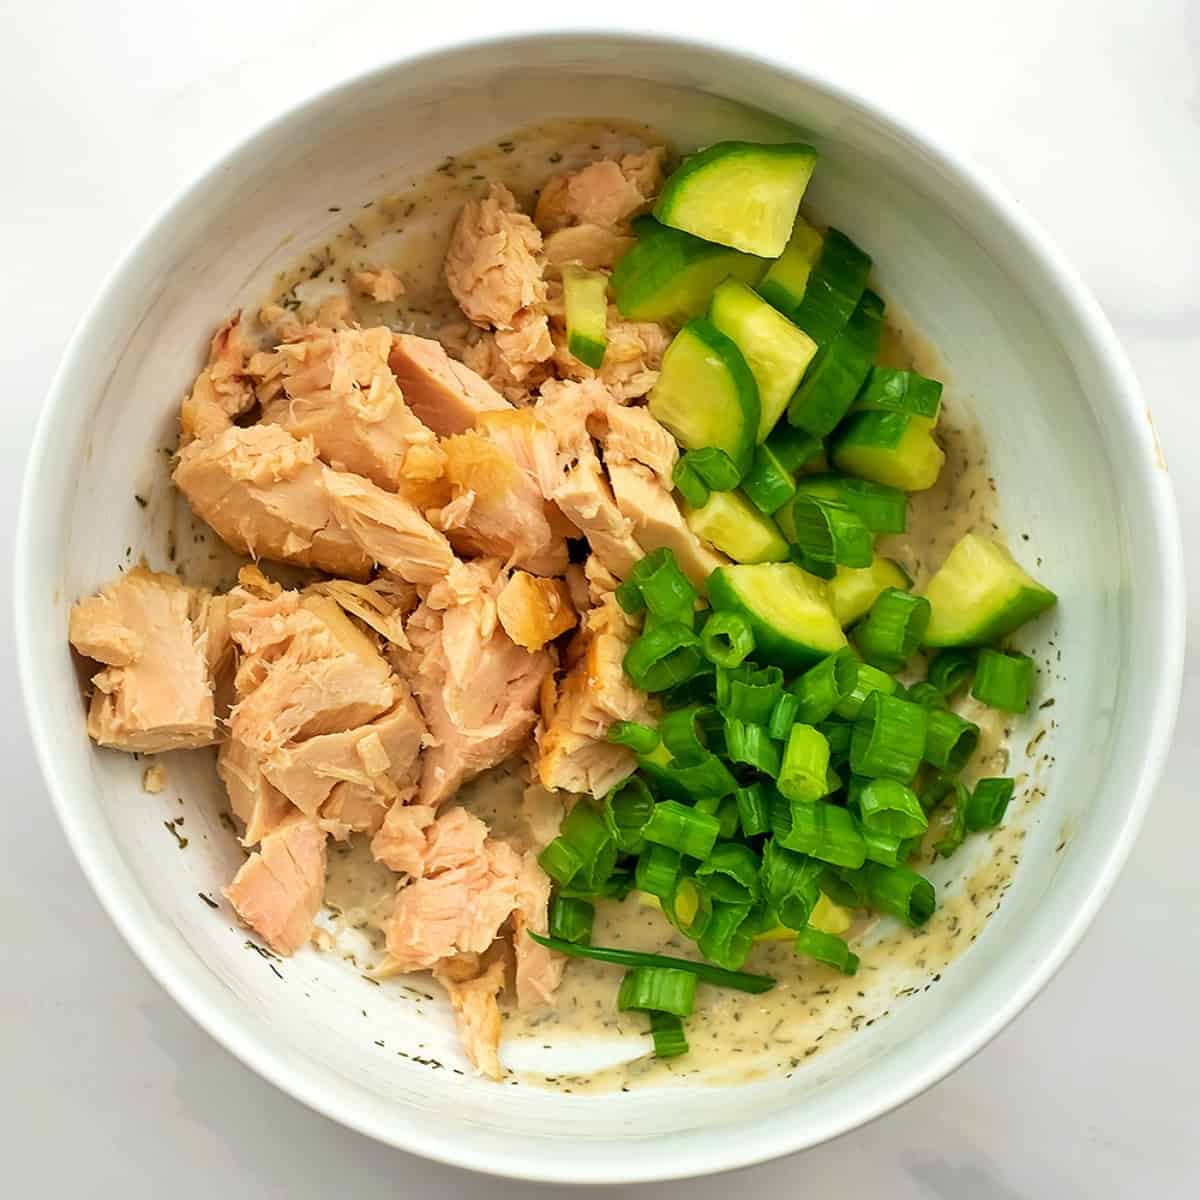 Tuna and veggies in the bowl with the dressing.